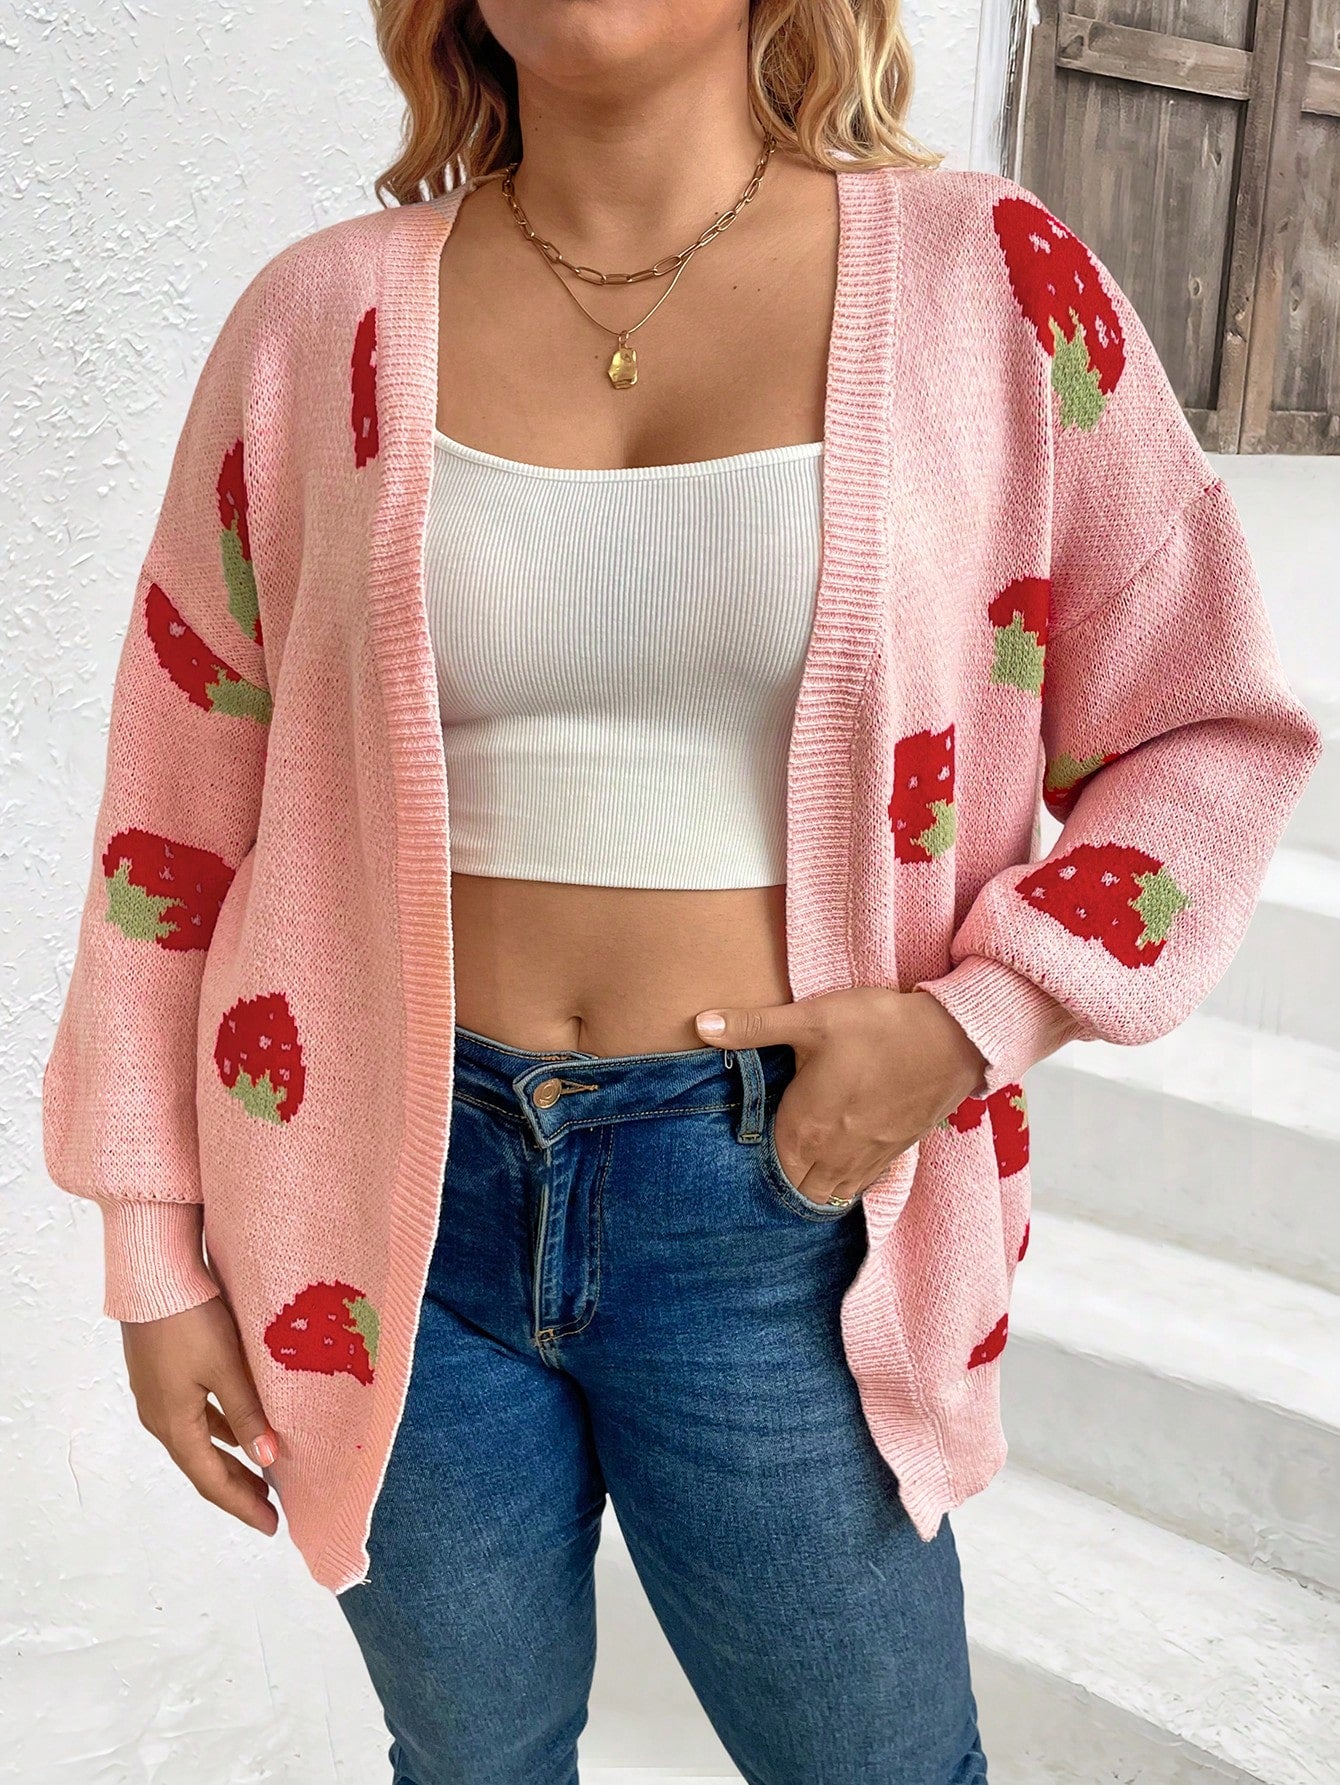 Ladies" Simple Strawberry Print Cardigan Sweater For Daily Wear